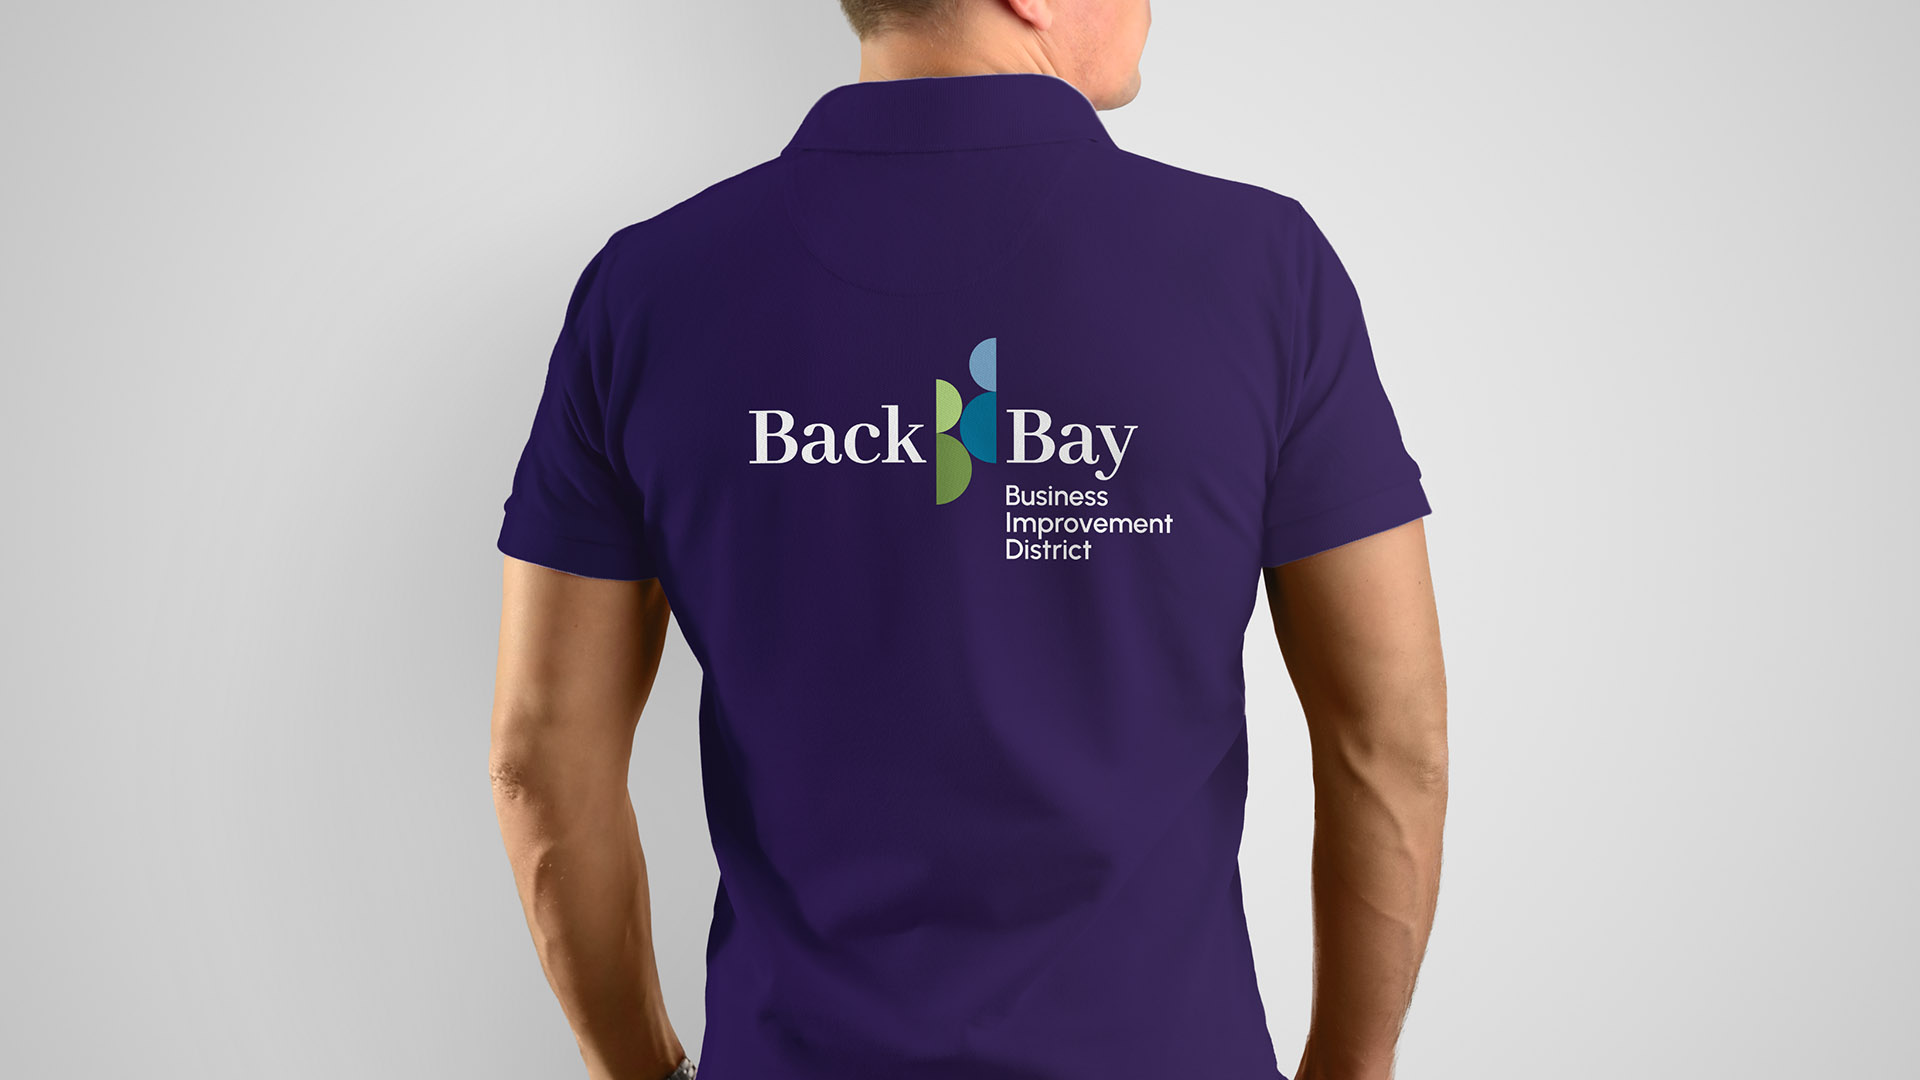 back bay business improvement district t shirt with logo